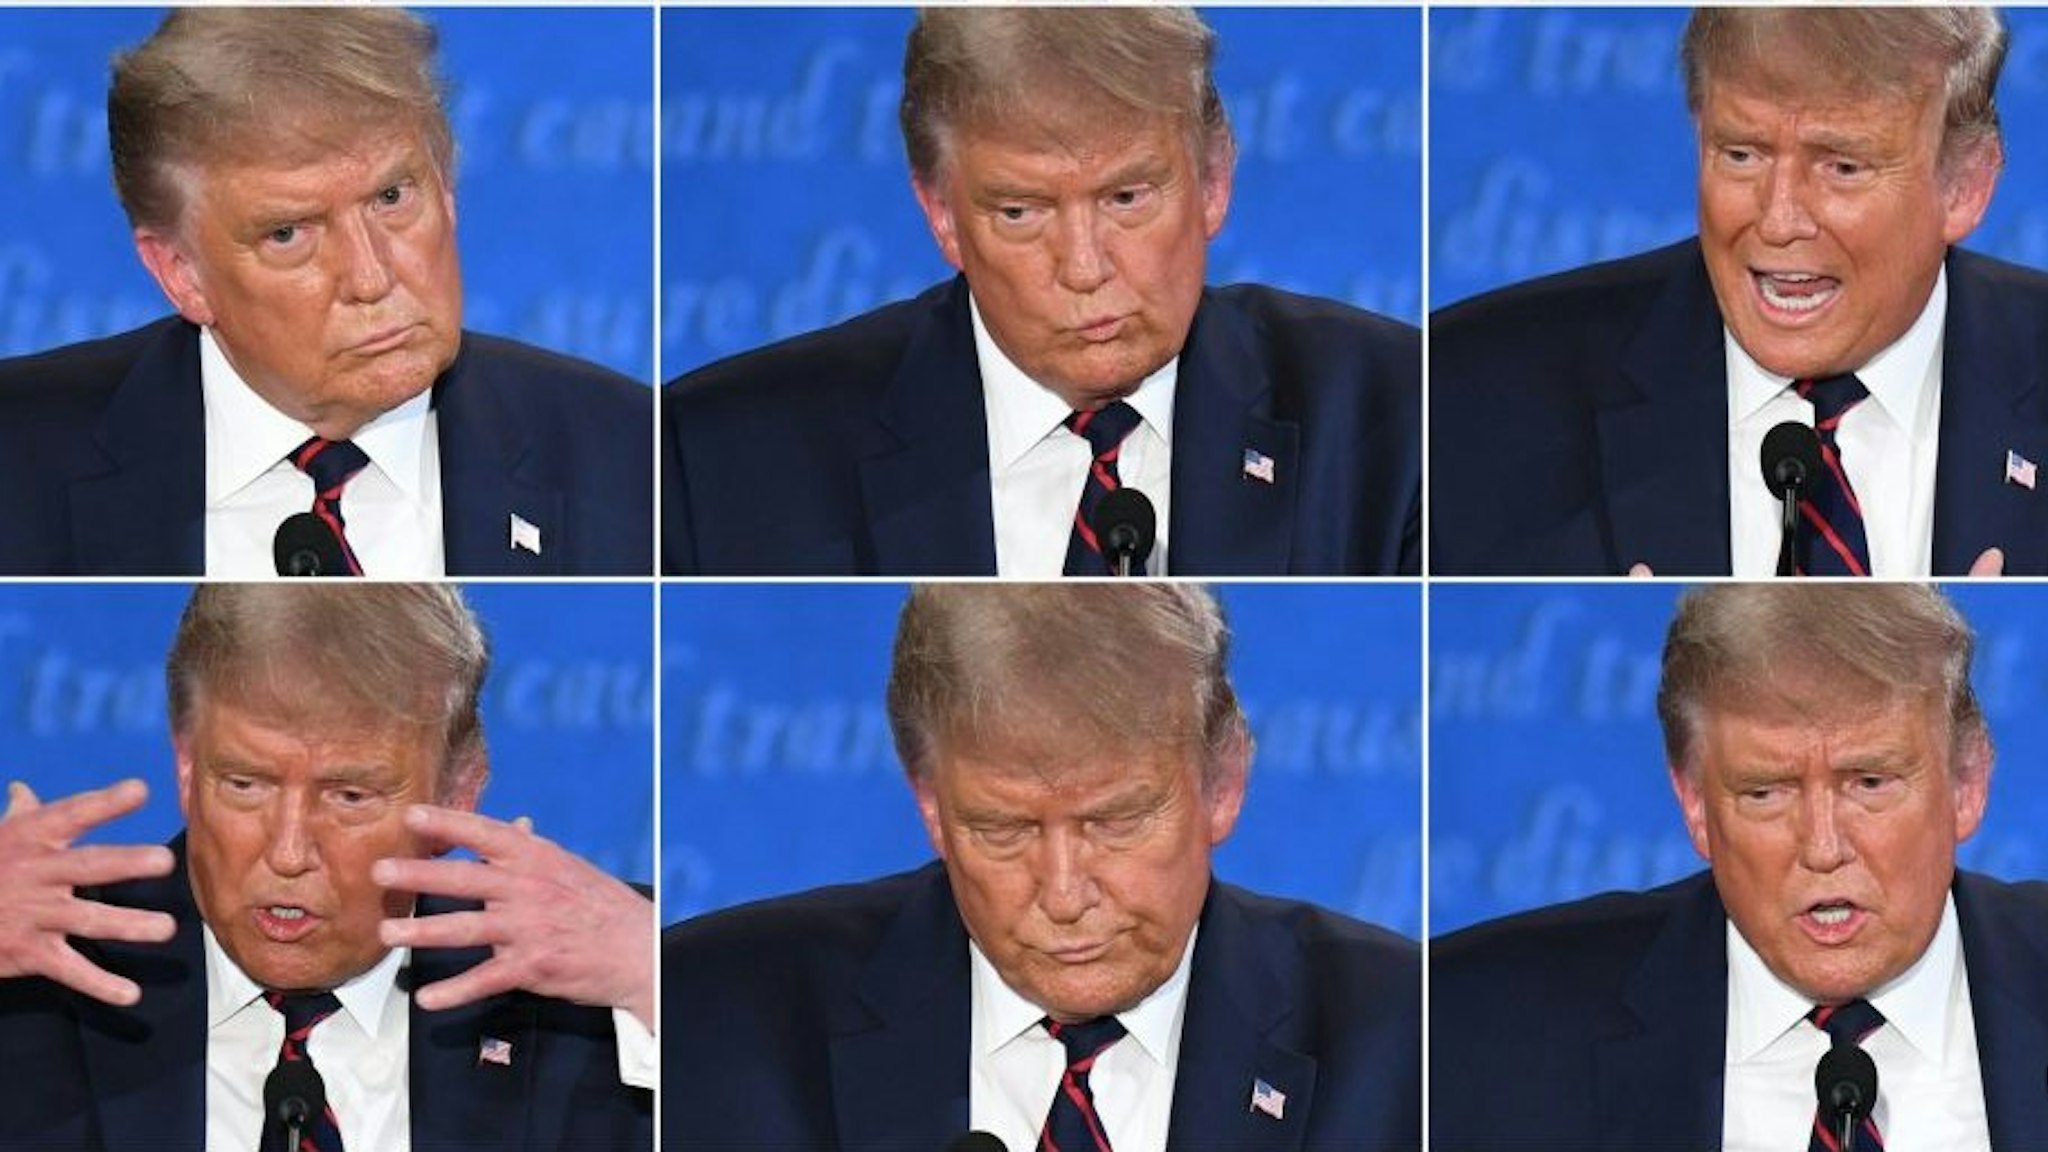 TOPSHOT - (COMBO) This combination of pictures created on September 29, 2020 shows US President Donald Trump during the first presidential debate with Democratic Presidential candidate former Vice President Joe Biden at Case Western Reserve University and Cleveland Clinic in Cleveland, Ohio, on September 29, 2020. (Photos by SAUL LOEB / AFP) (Photo by